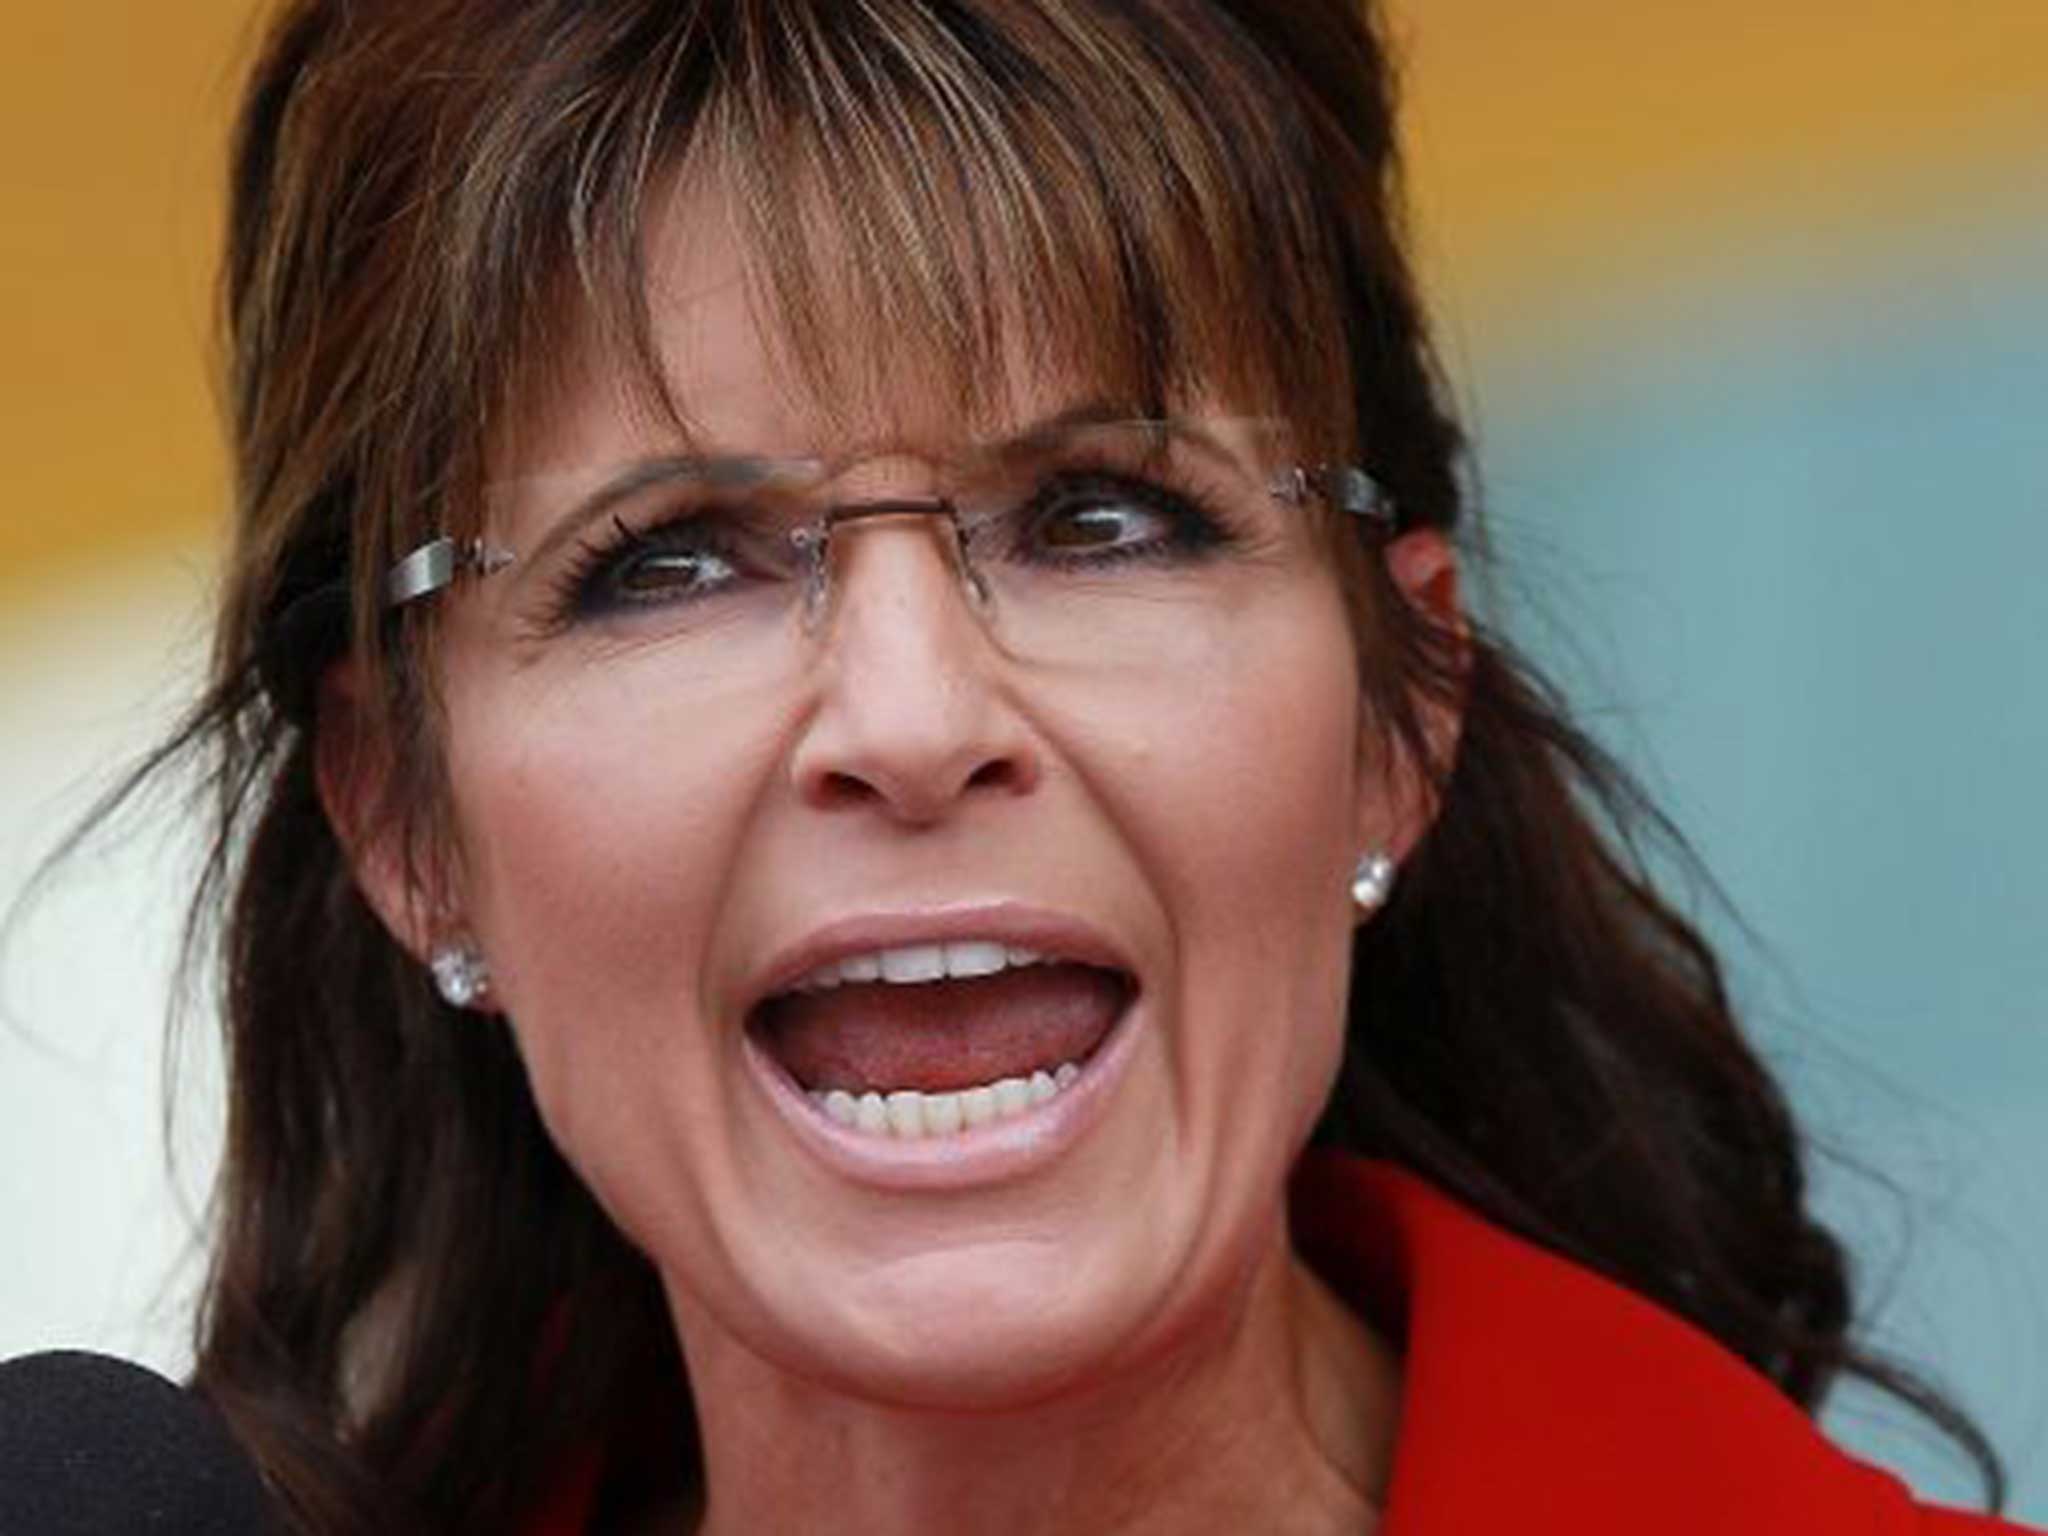 Sarah Palin offers America a 'global apology' for failing in 2008